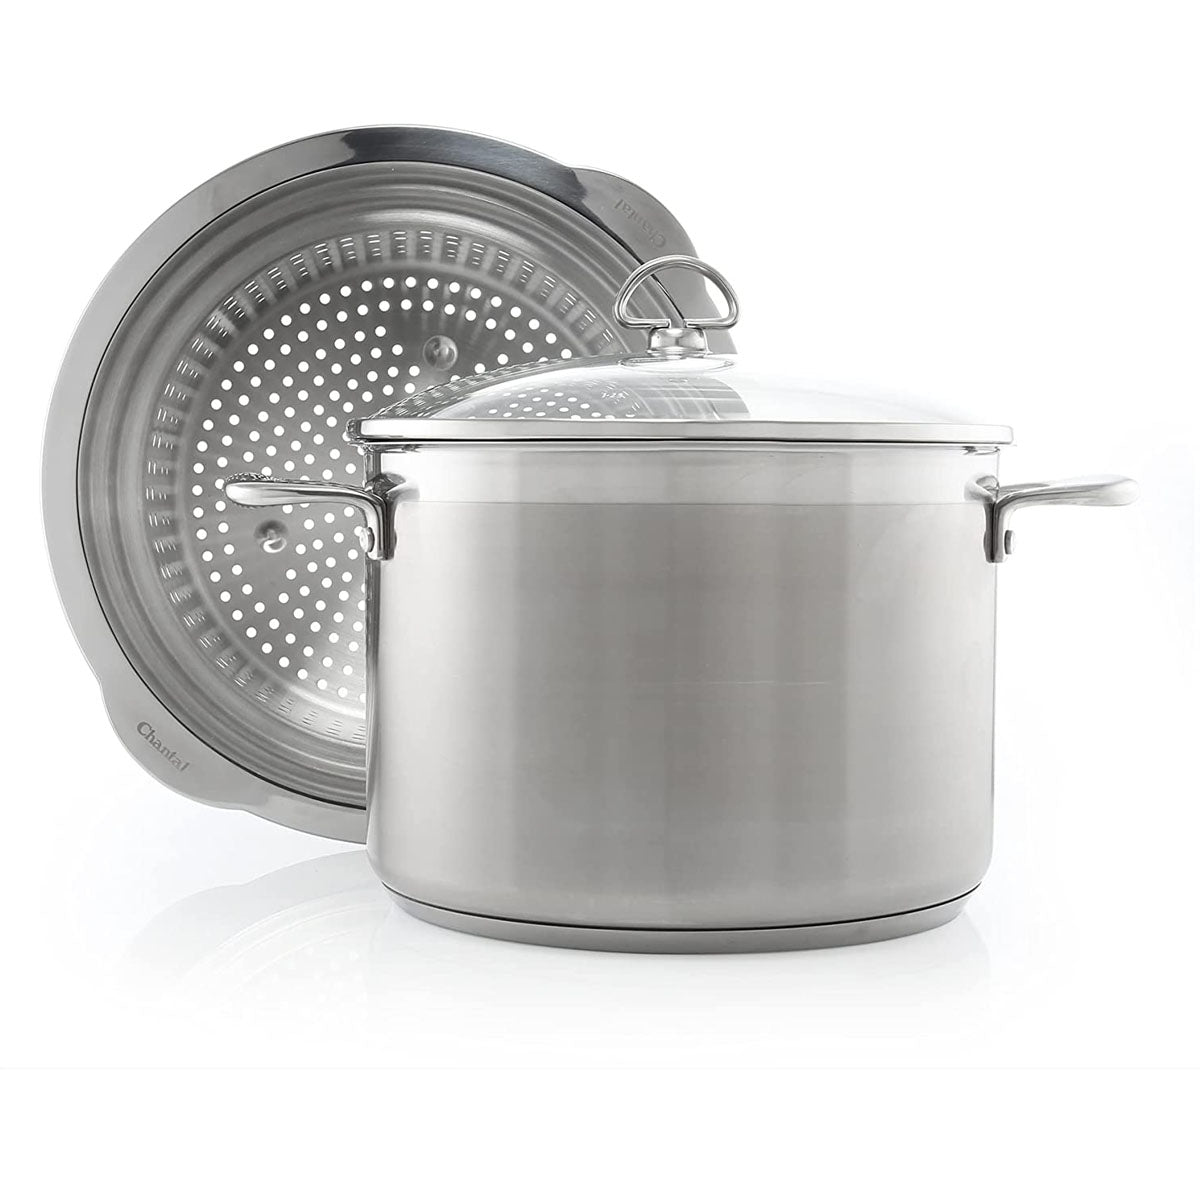  Made In Cookware - 8 Quart Stainless Steel Stock Pot